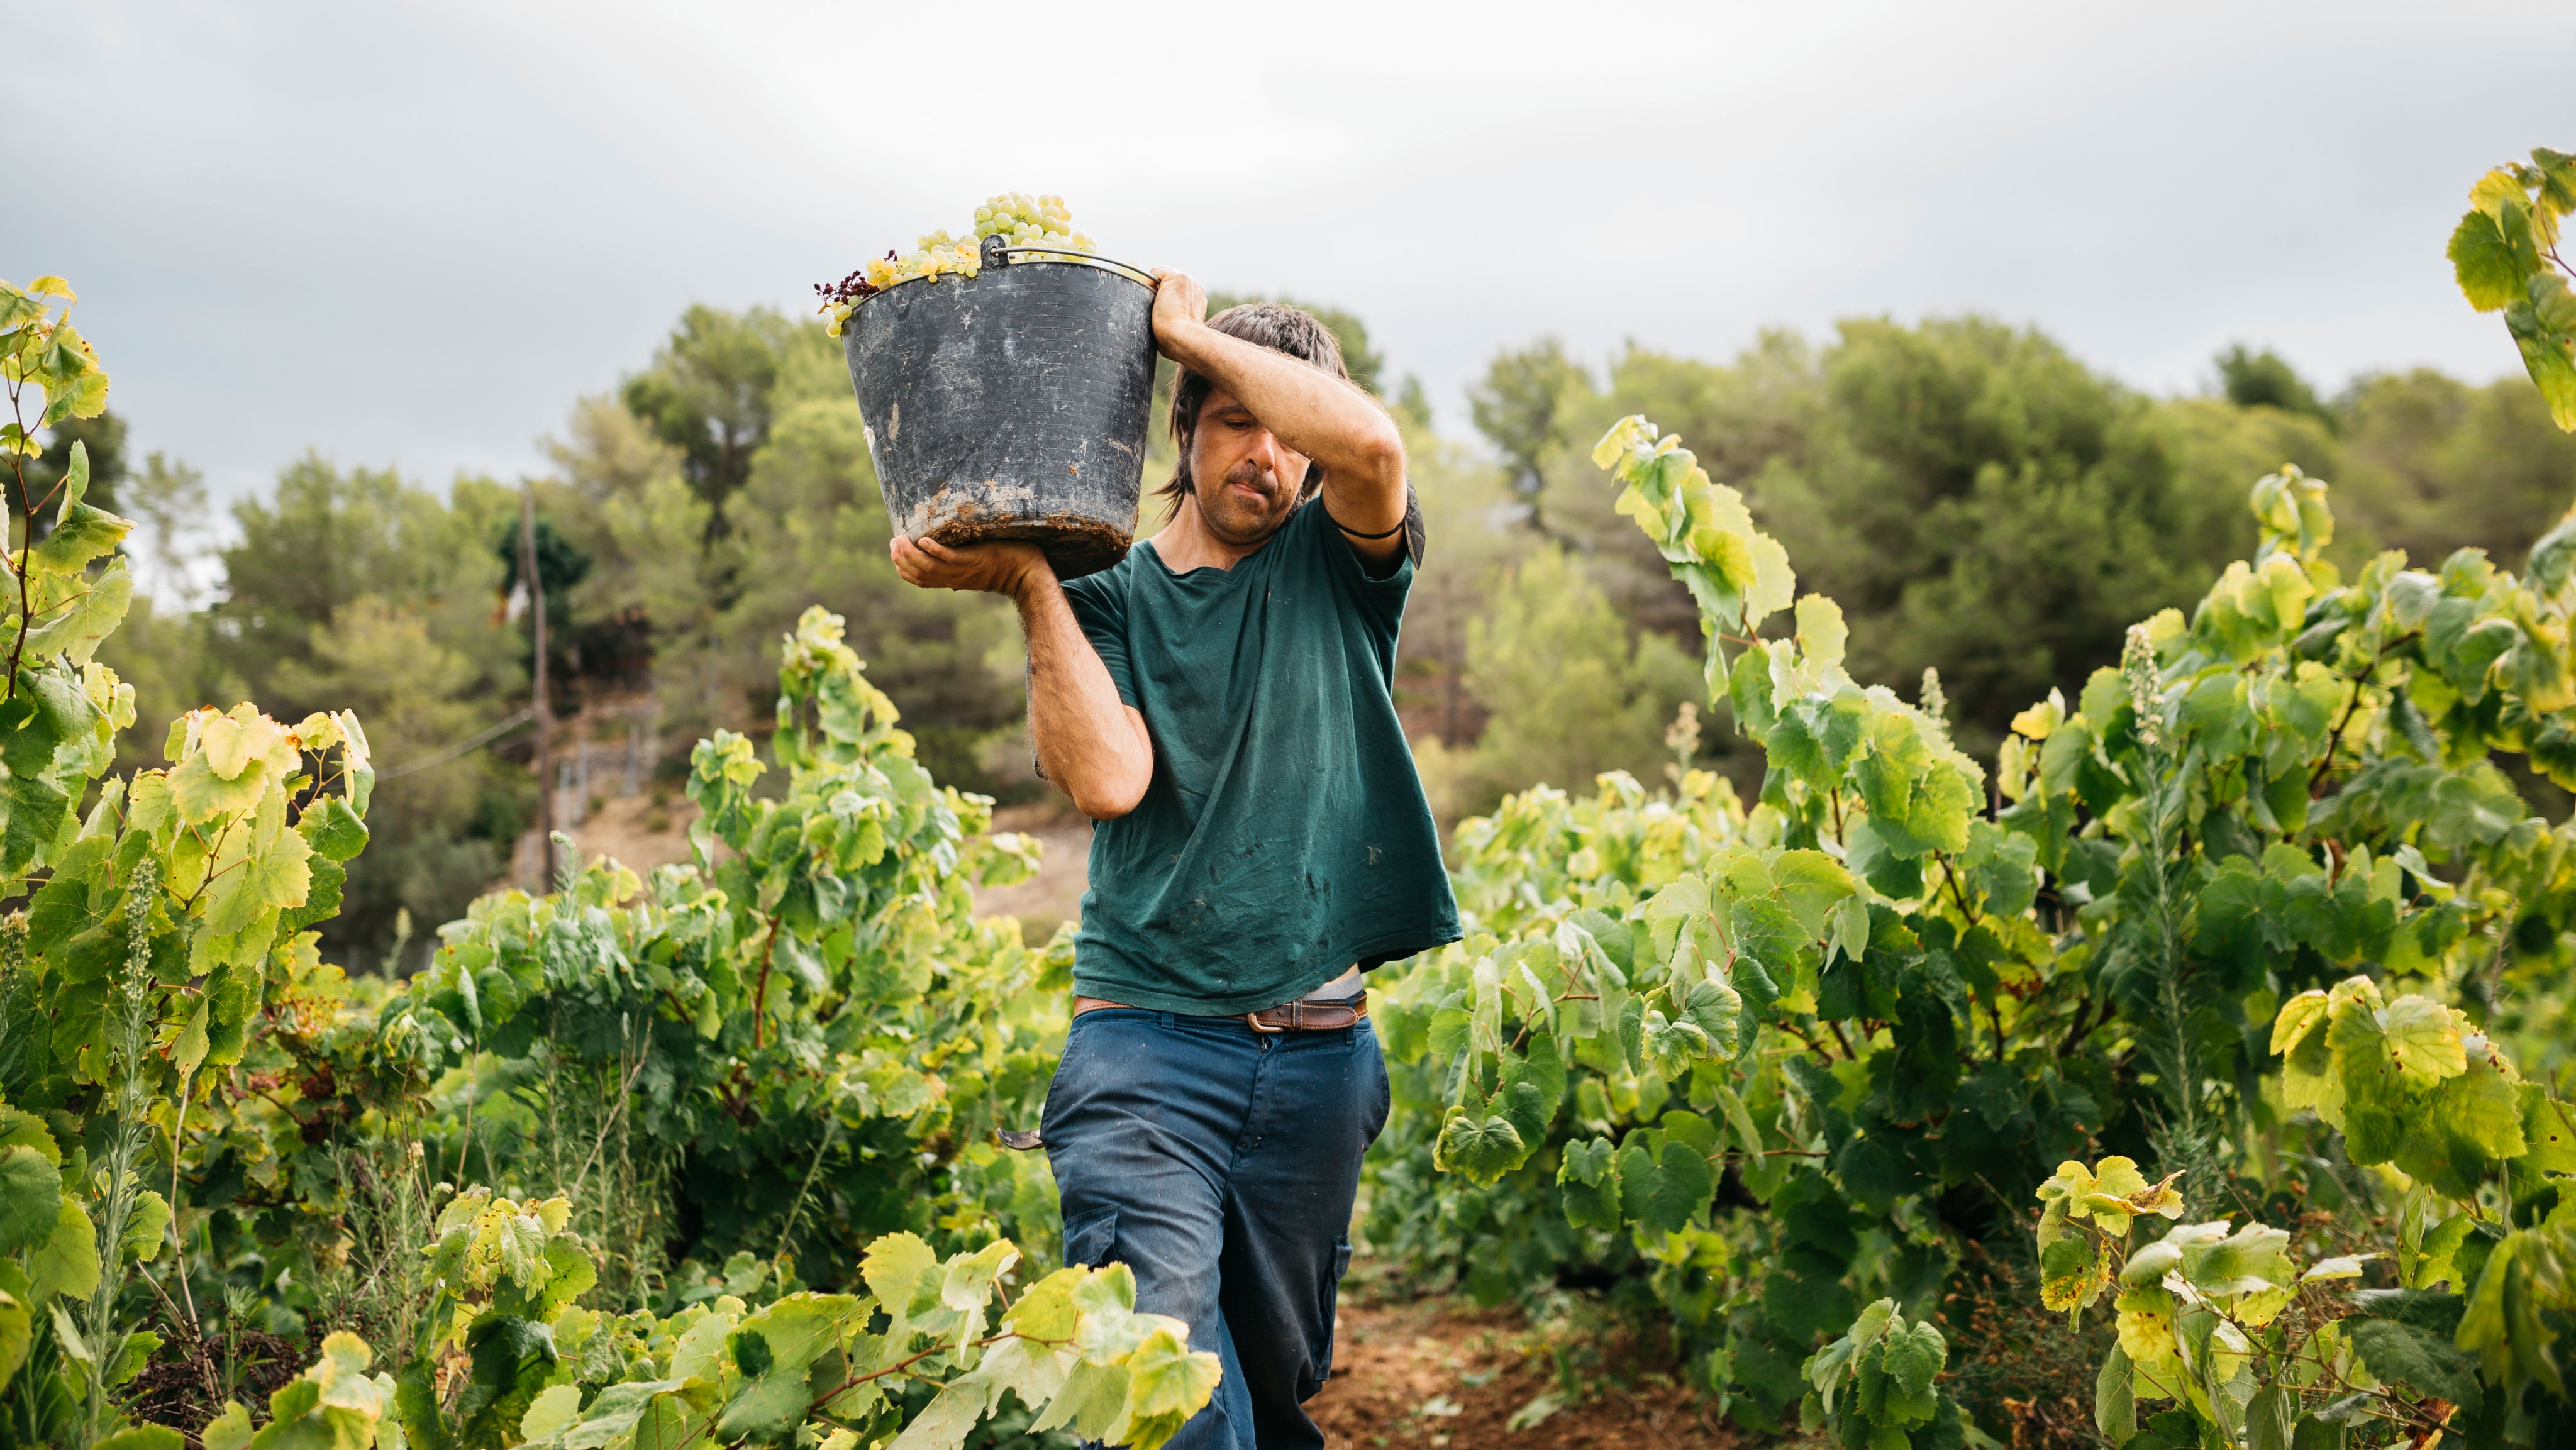 Man carrying a bucket with white grapes